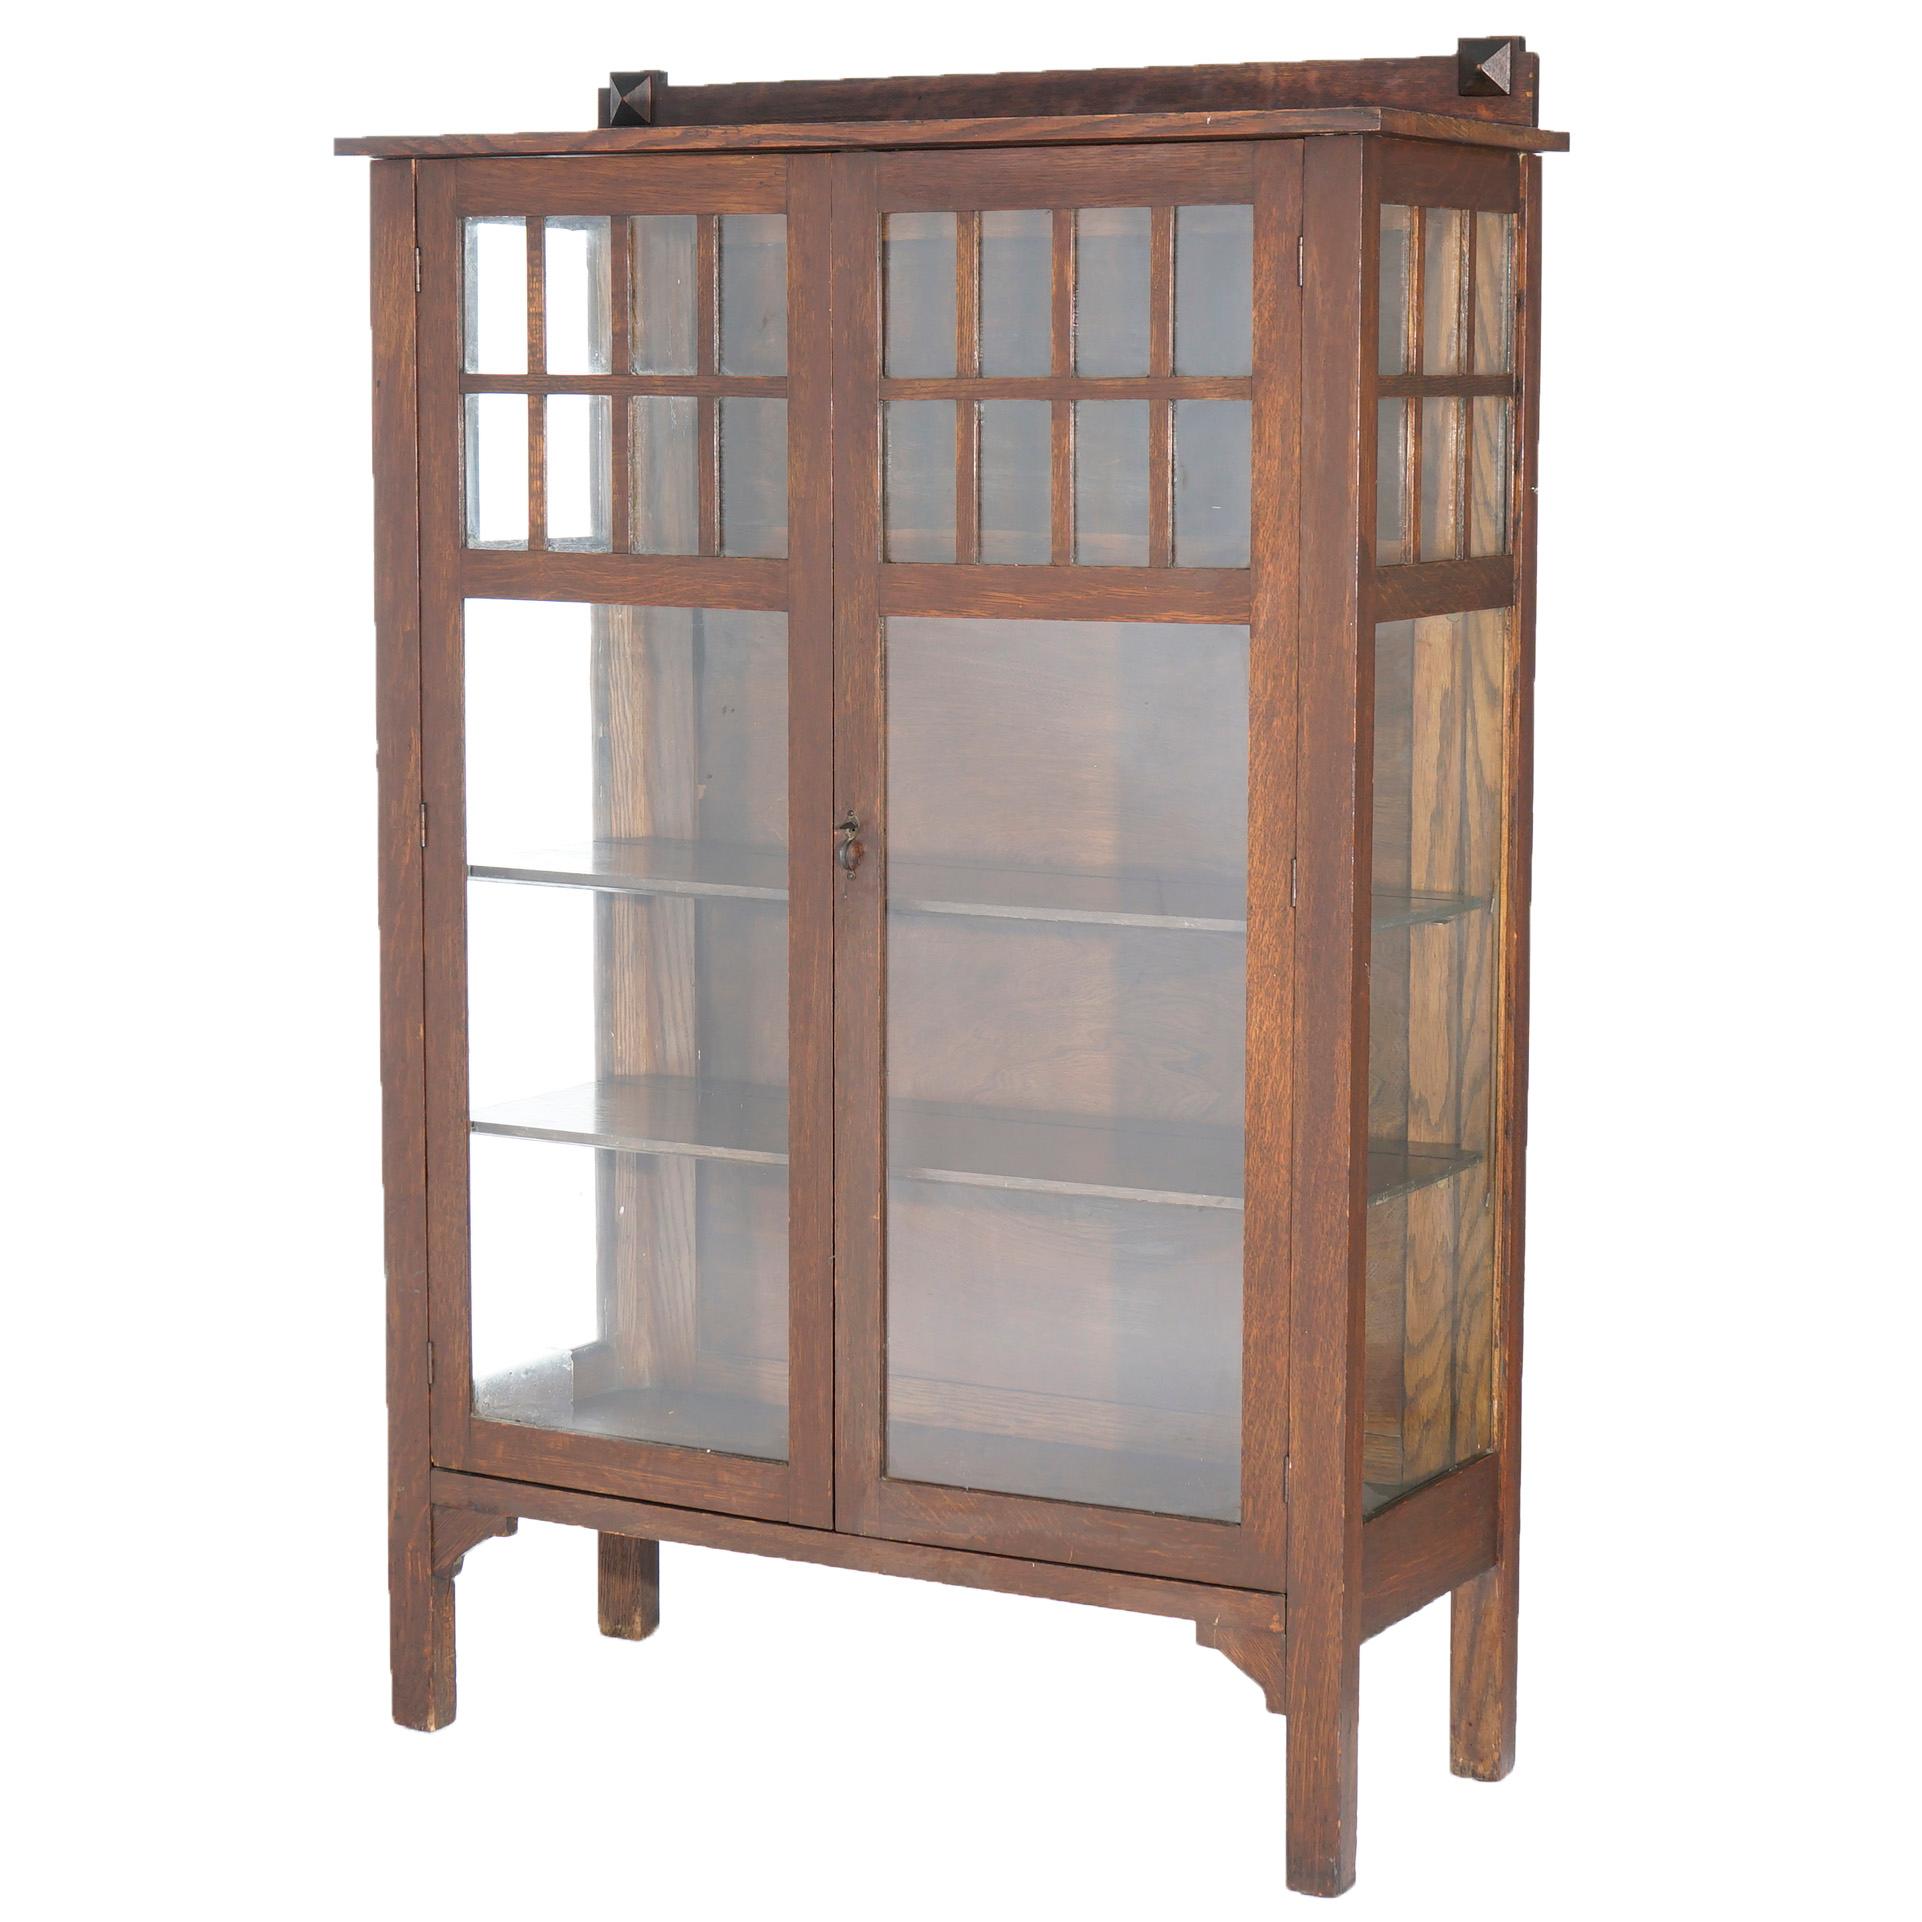 An antique Arts and Crafts Mission china cabinet by Larkin offers quarter sawn construction with upper backsplash surmounting case with glass side and doors opening to shelved interior, raised on square and straight legs with decorative corbels,